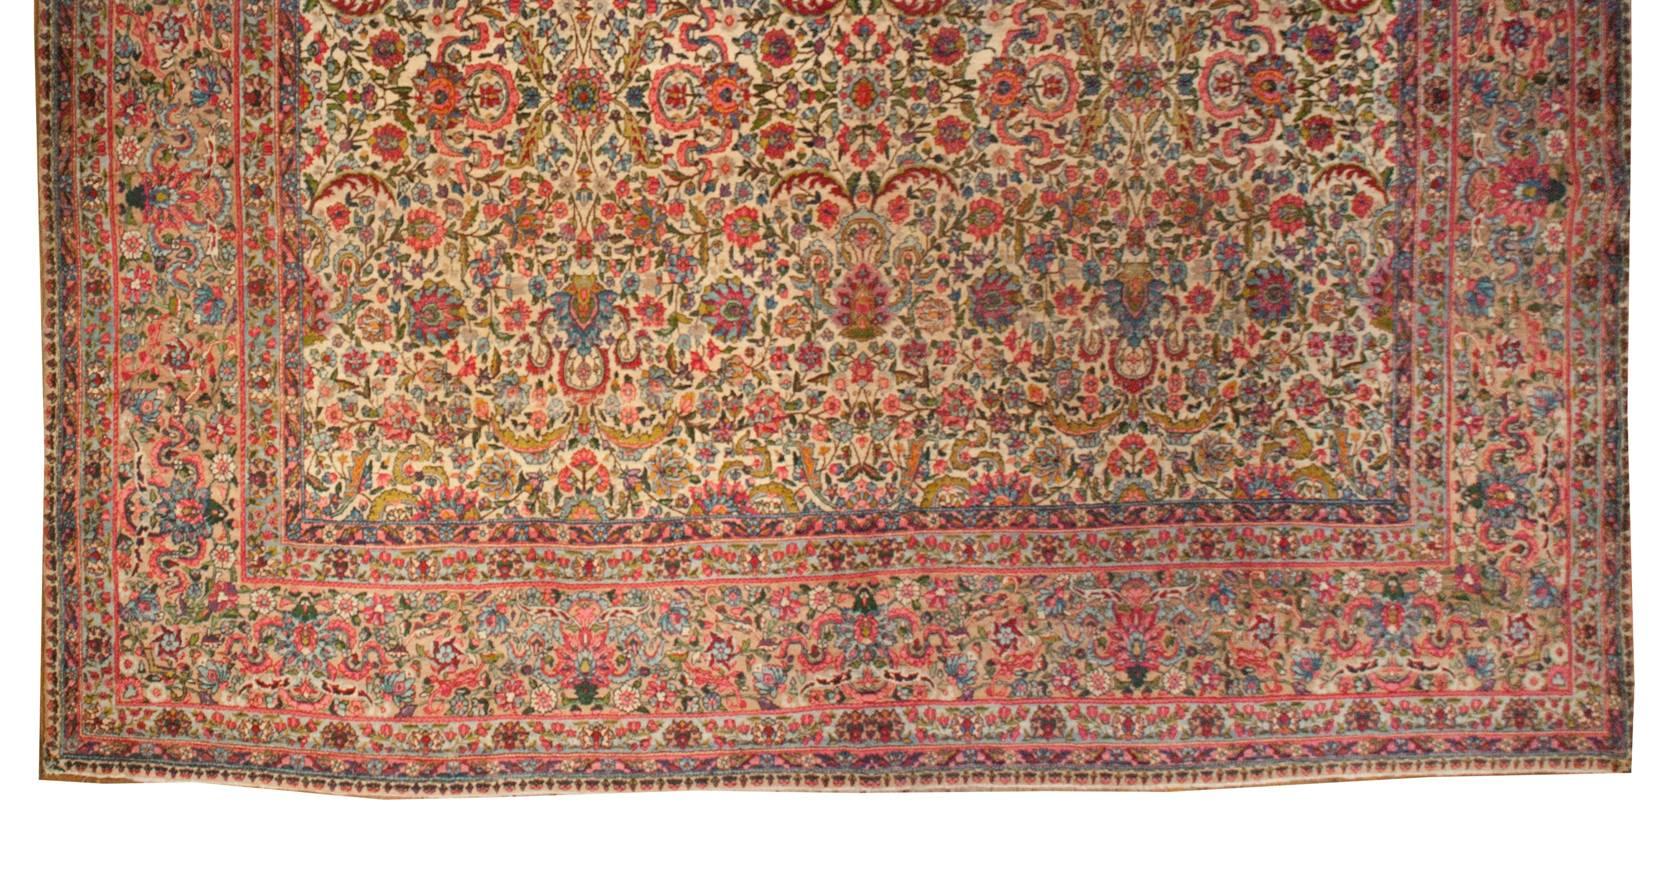 A beautiful early 20th century Persian Kirman rug with an elaborate and skillfully woven all-over multicolored pattern of interwoven large and small-scale flowers, scrolling vines and leaves, on a natural undyed background. The border is